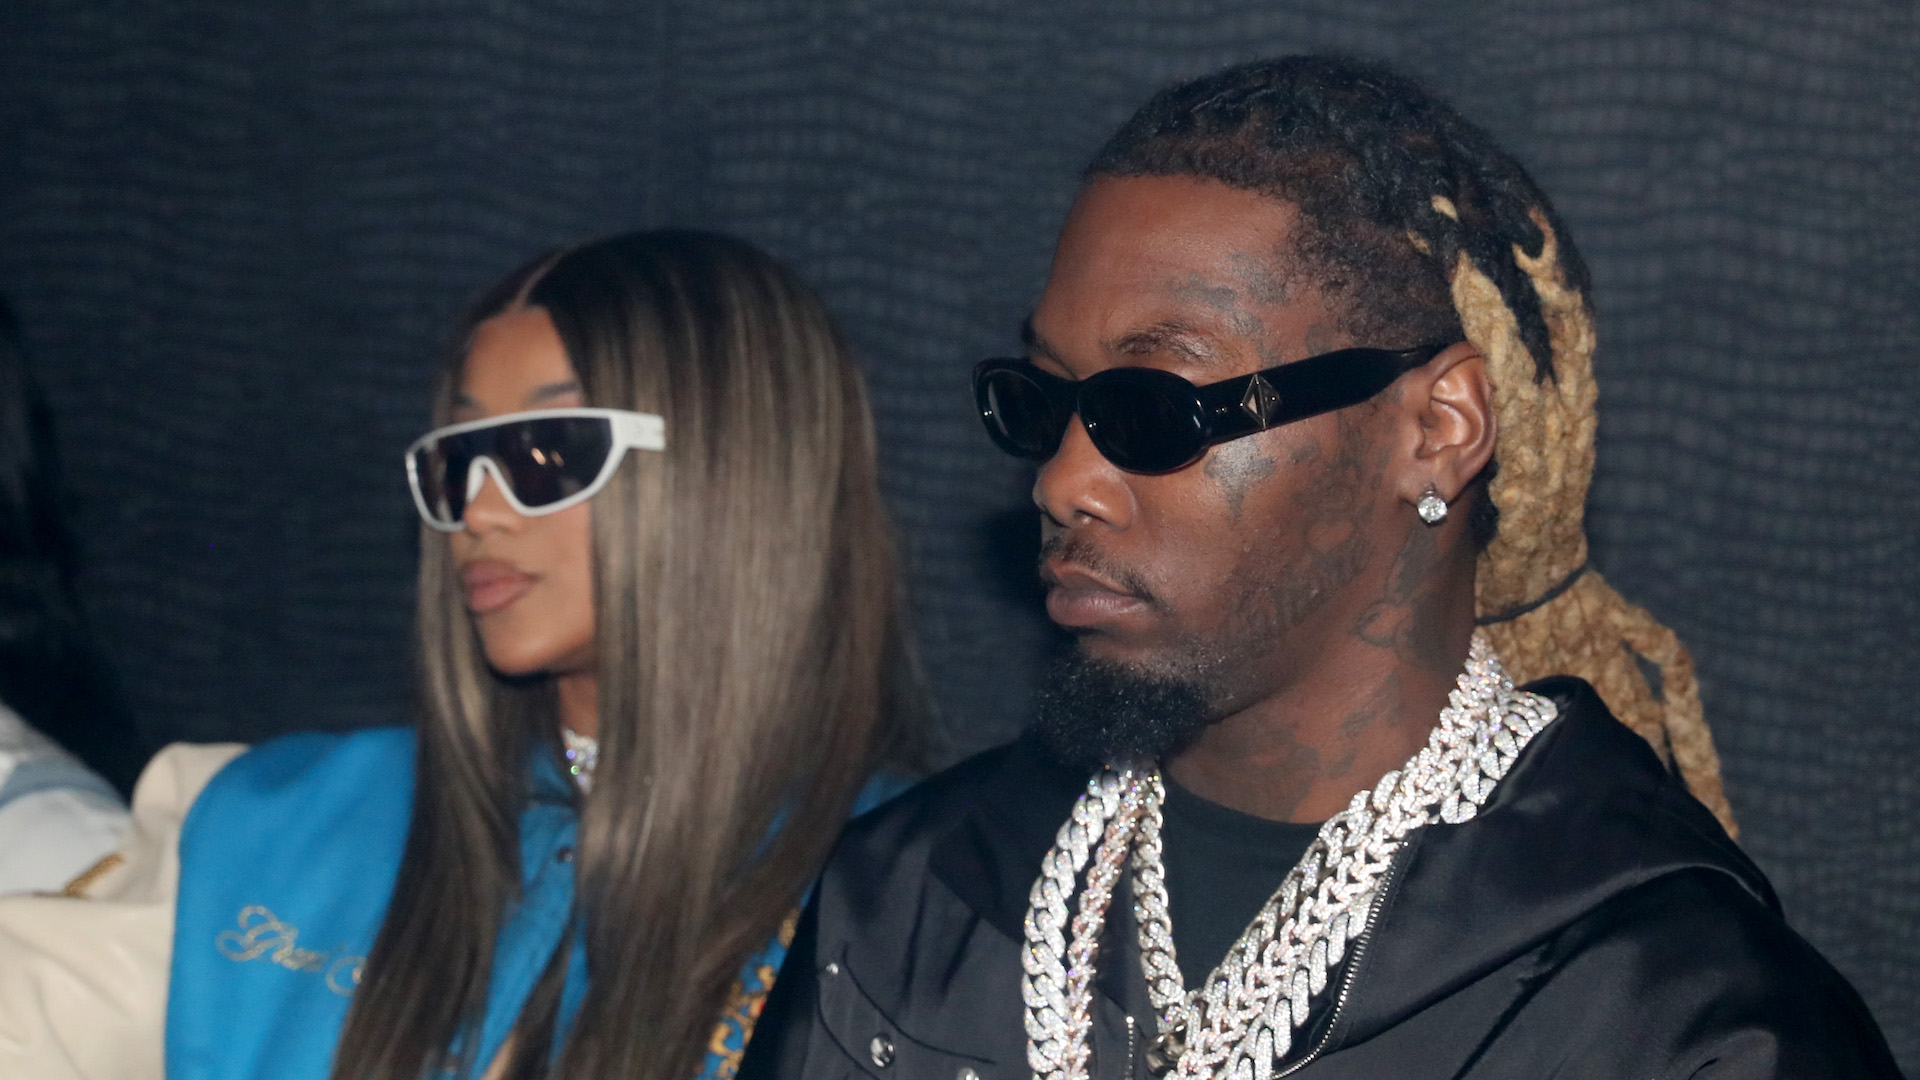 DJ Apologizes to Cardi B and Offset Over Tense Club Moment That Went Viral